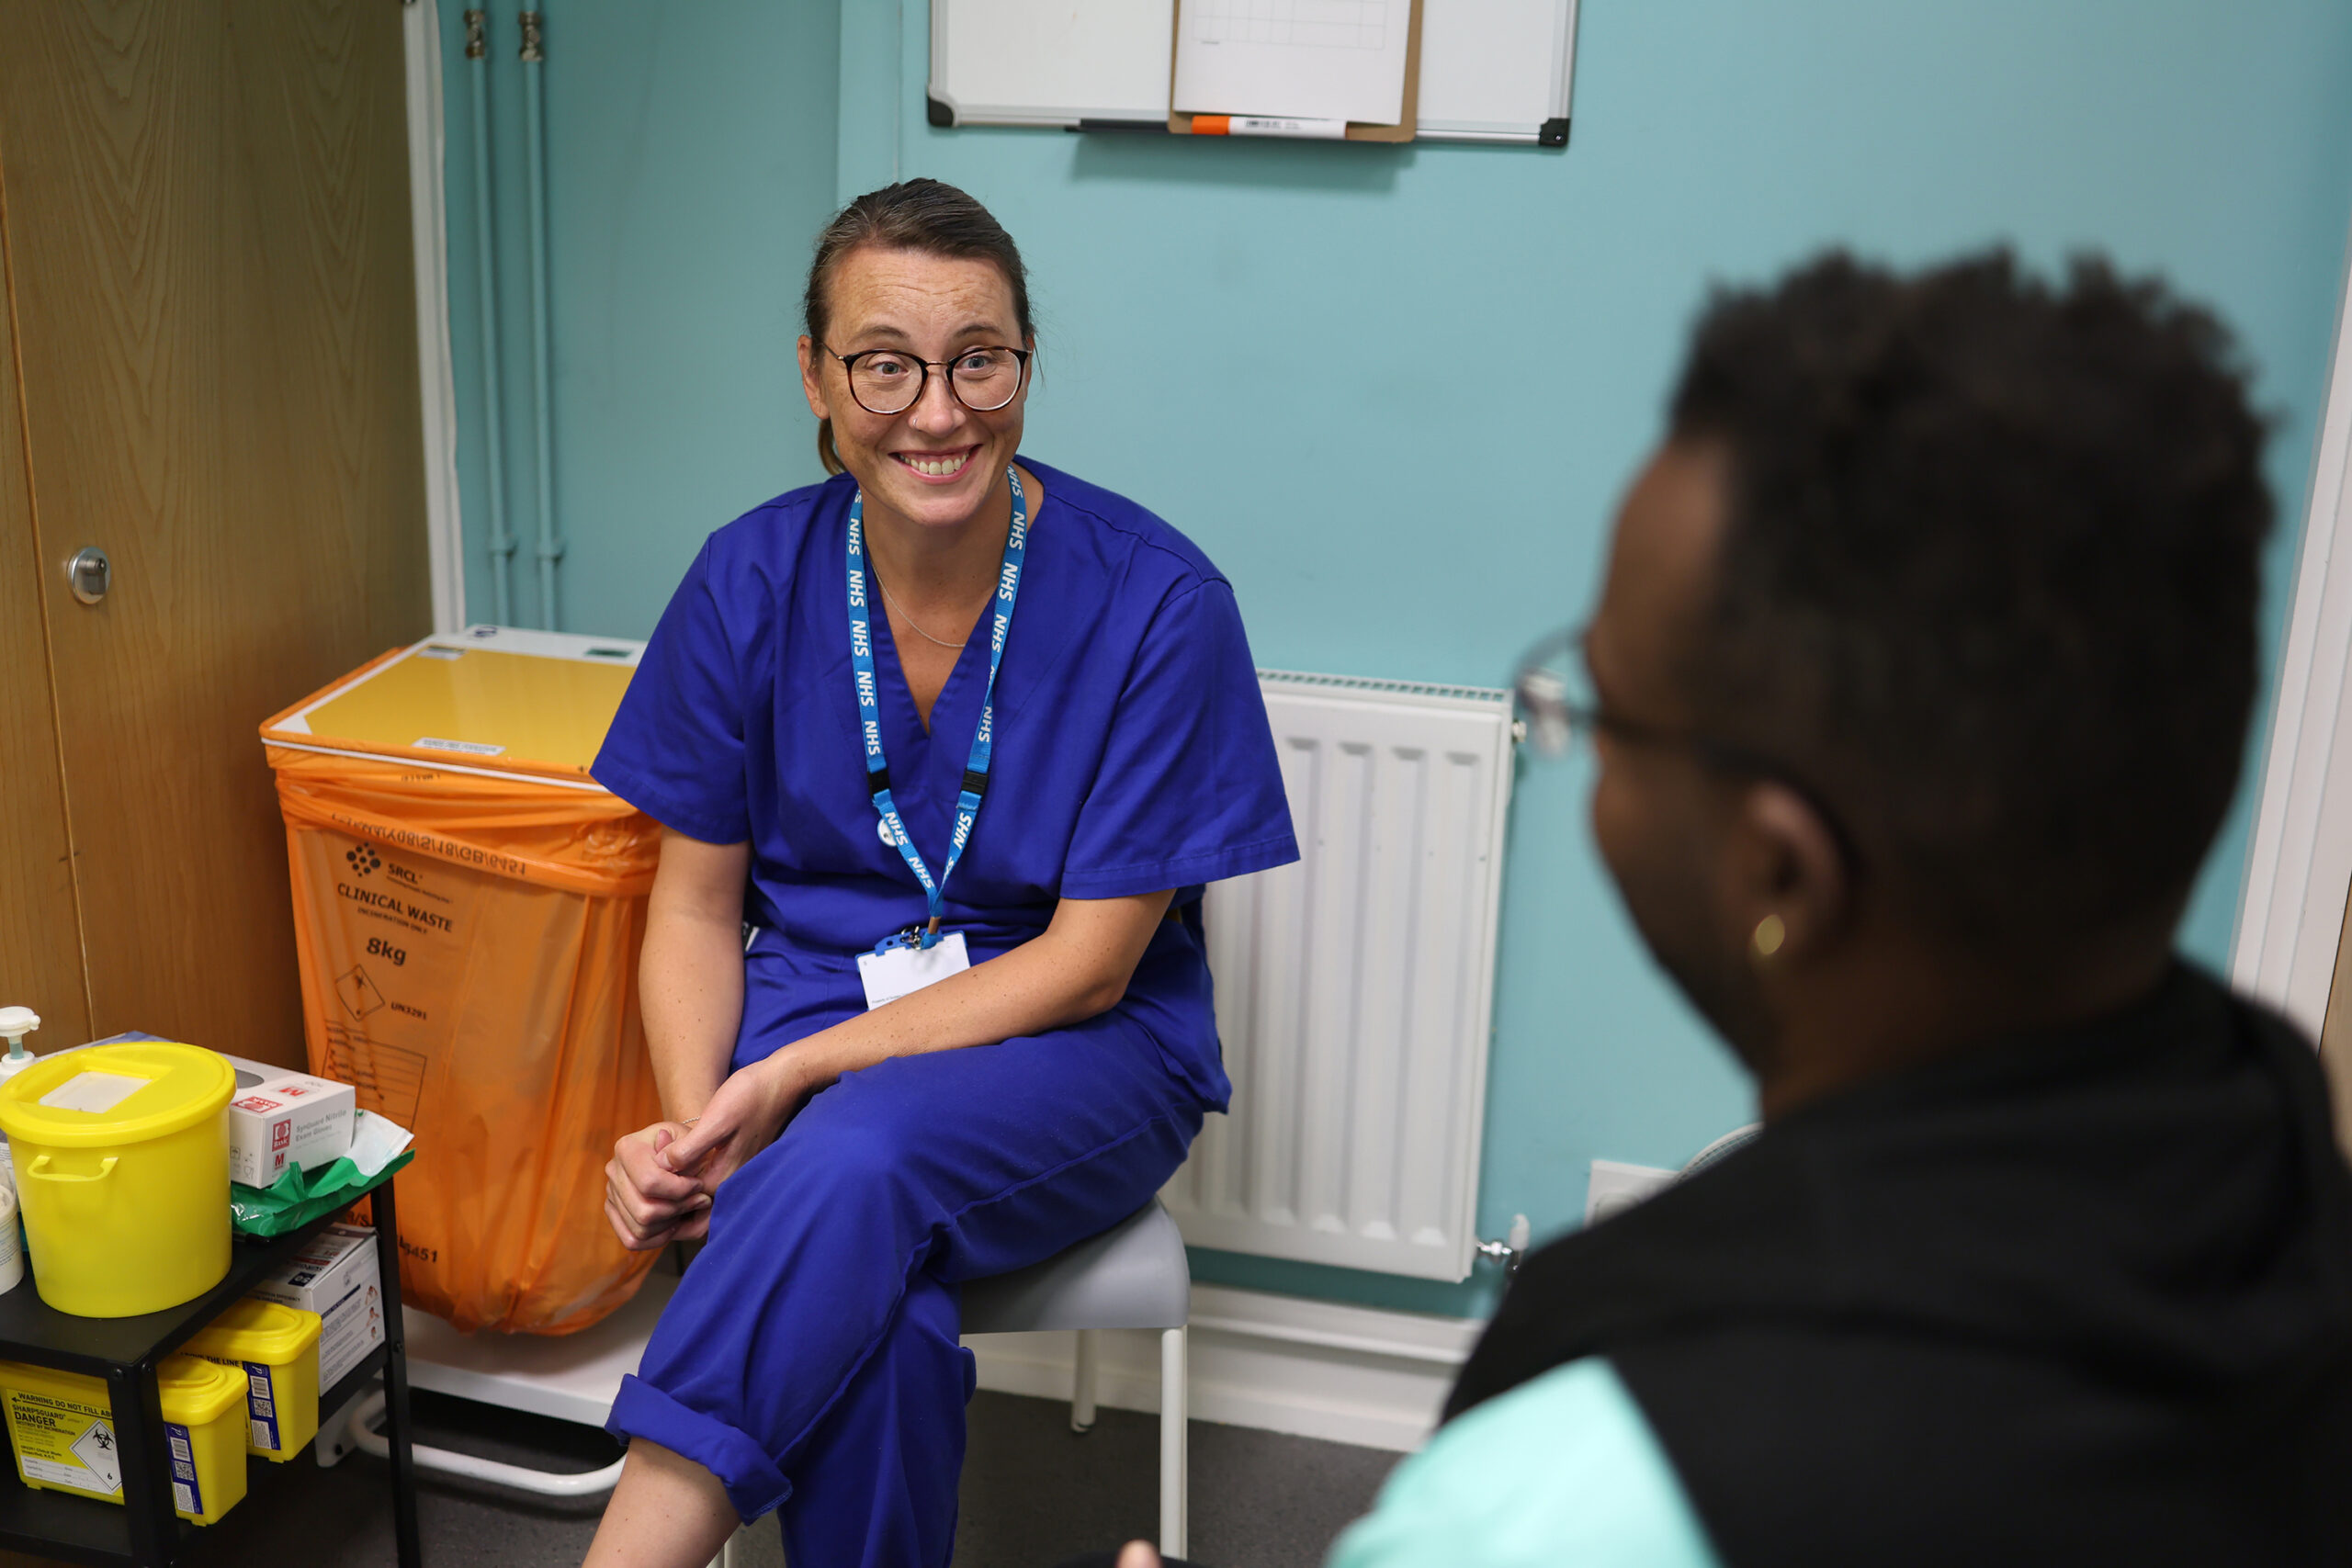 A nurse in scrubs sitting in a clinic with a patient, smiling and talking to the patient (back view, blurred), nurse is in focus and smiling at the patient.